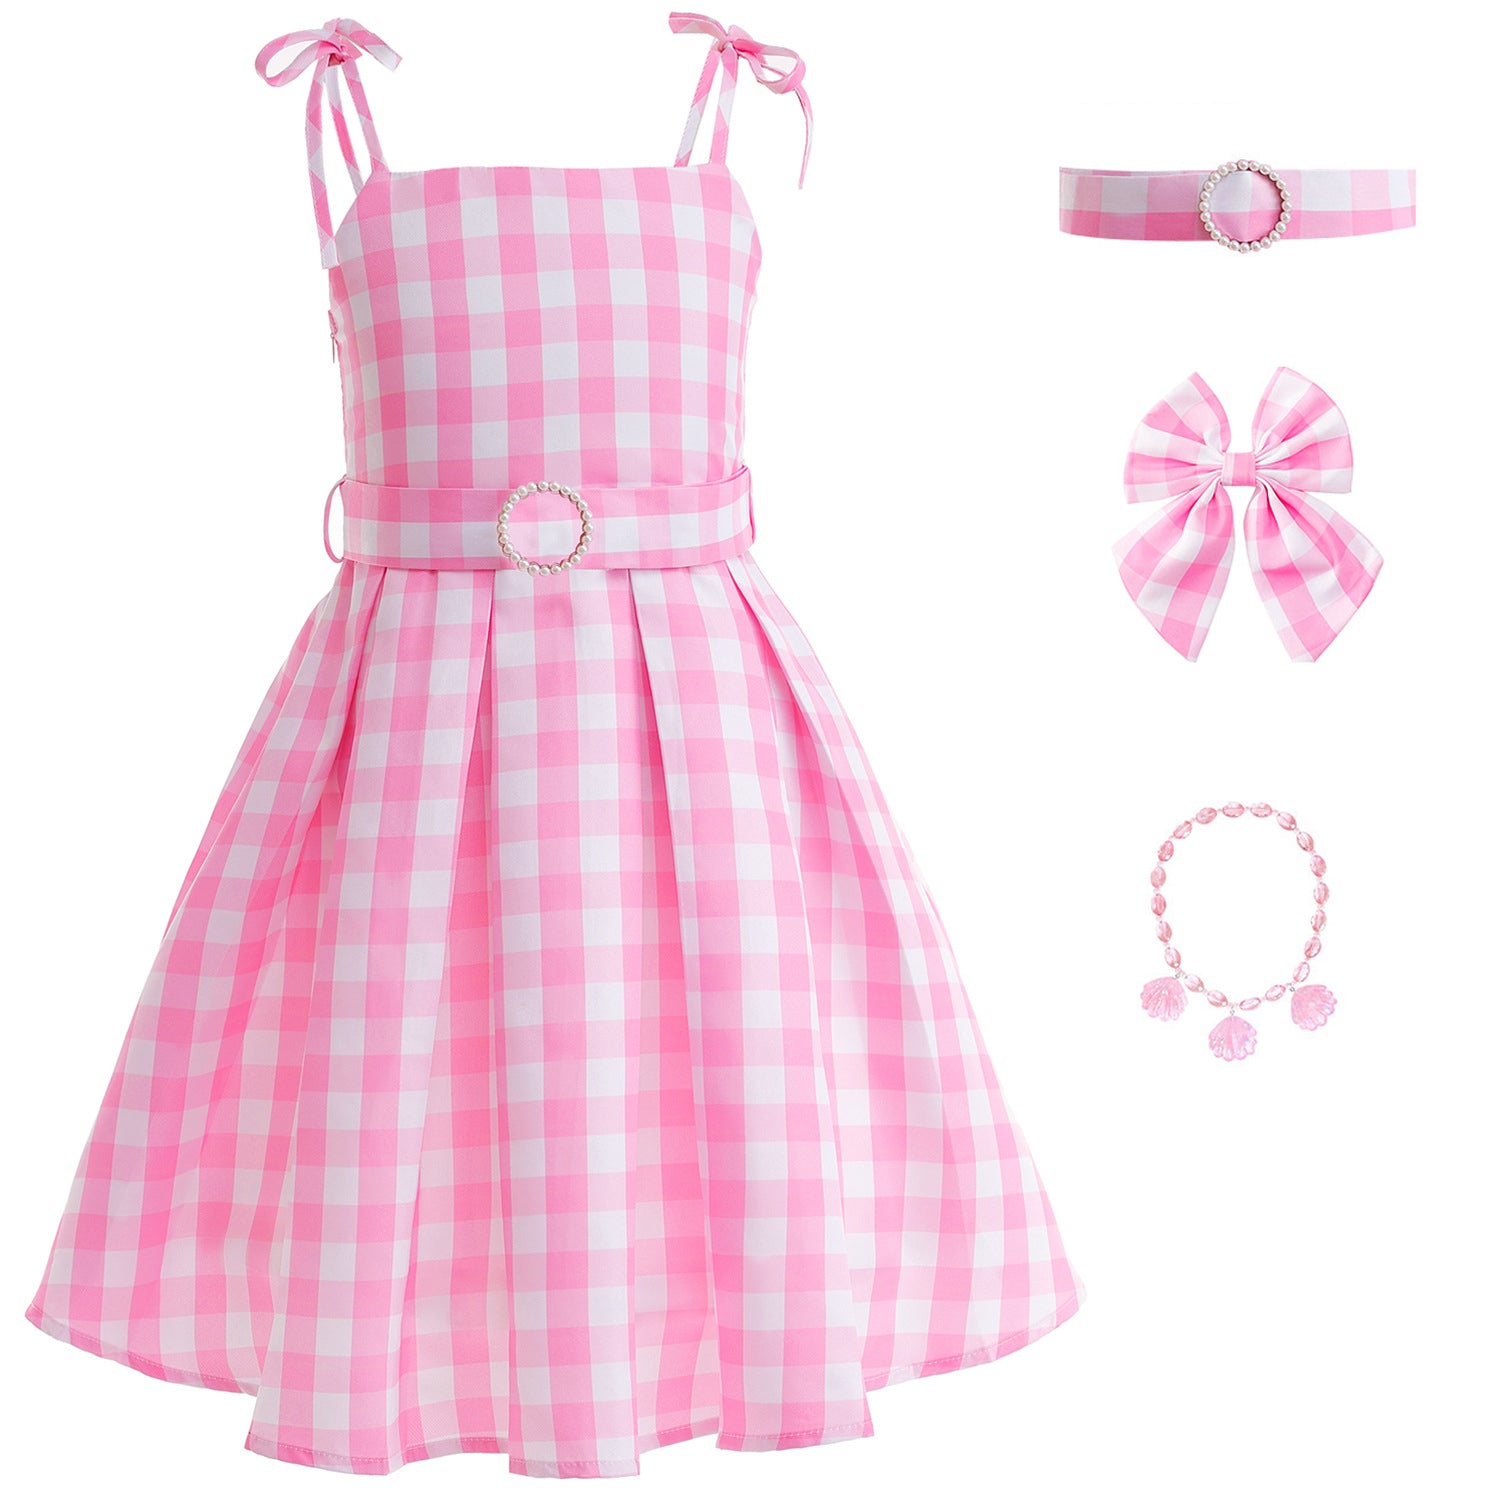 Barbie White Bowknot Costume For Kids.